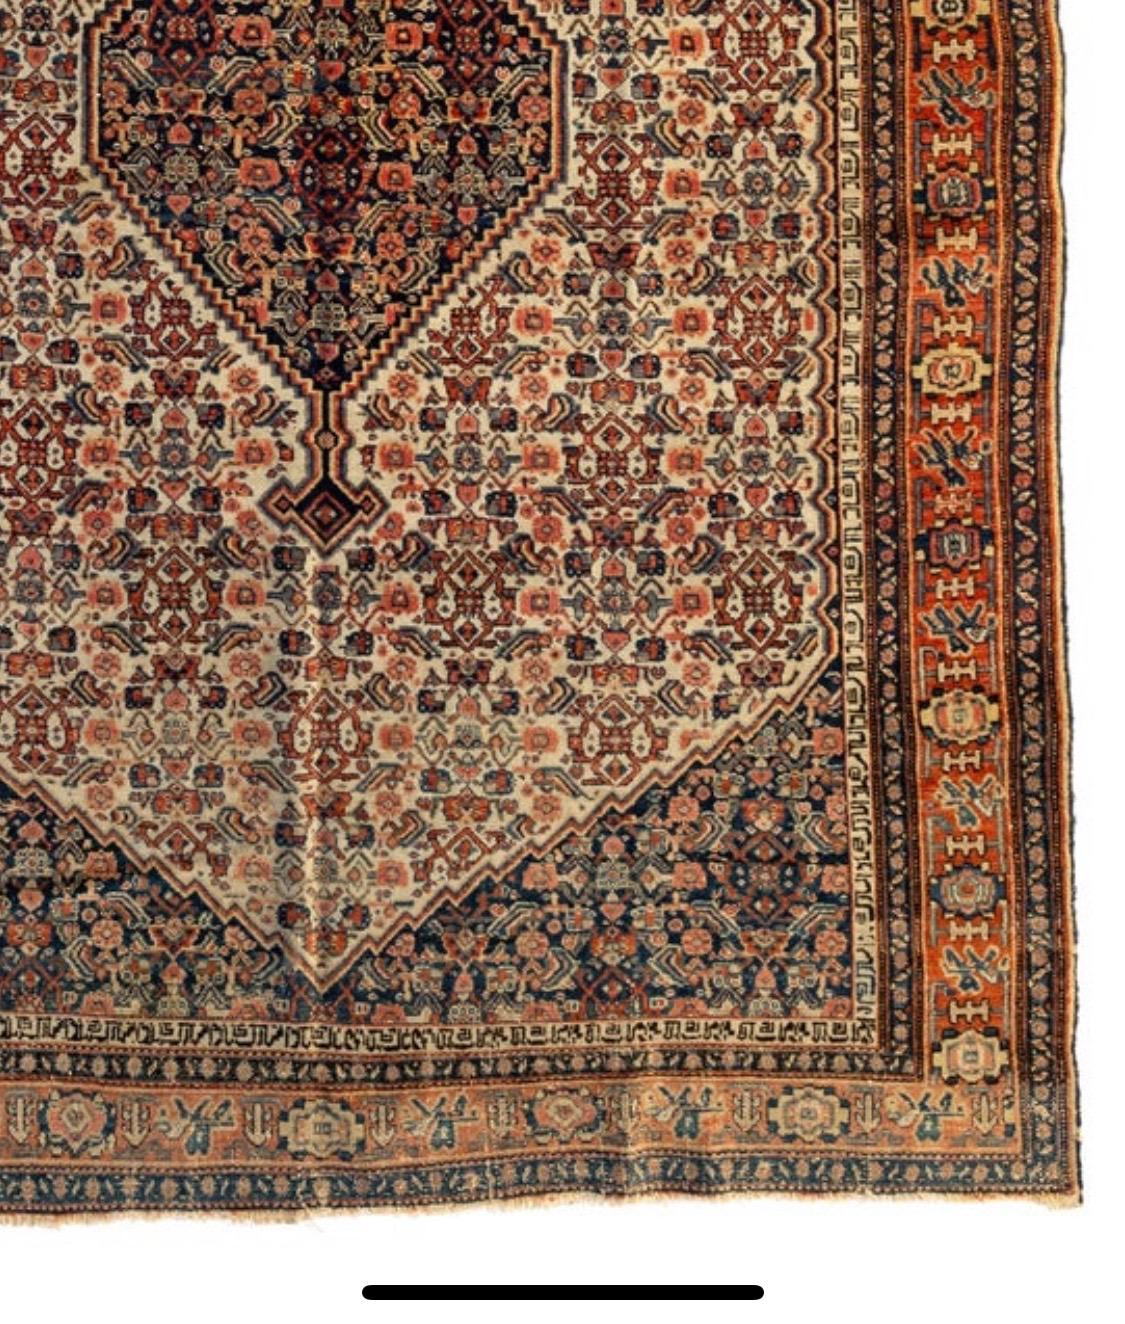 Antique Senneh rugs come from the Northwest region of Iran and the construction provides insight into the elegance of French tapestries. These rugs are the thinnest of Persian rugs, often with a single layer. They range in color from brilliant to